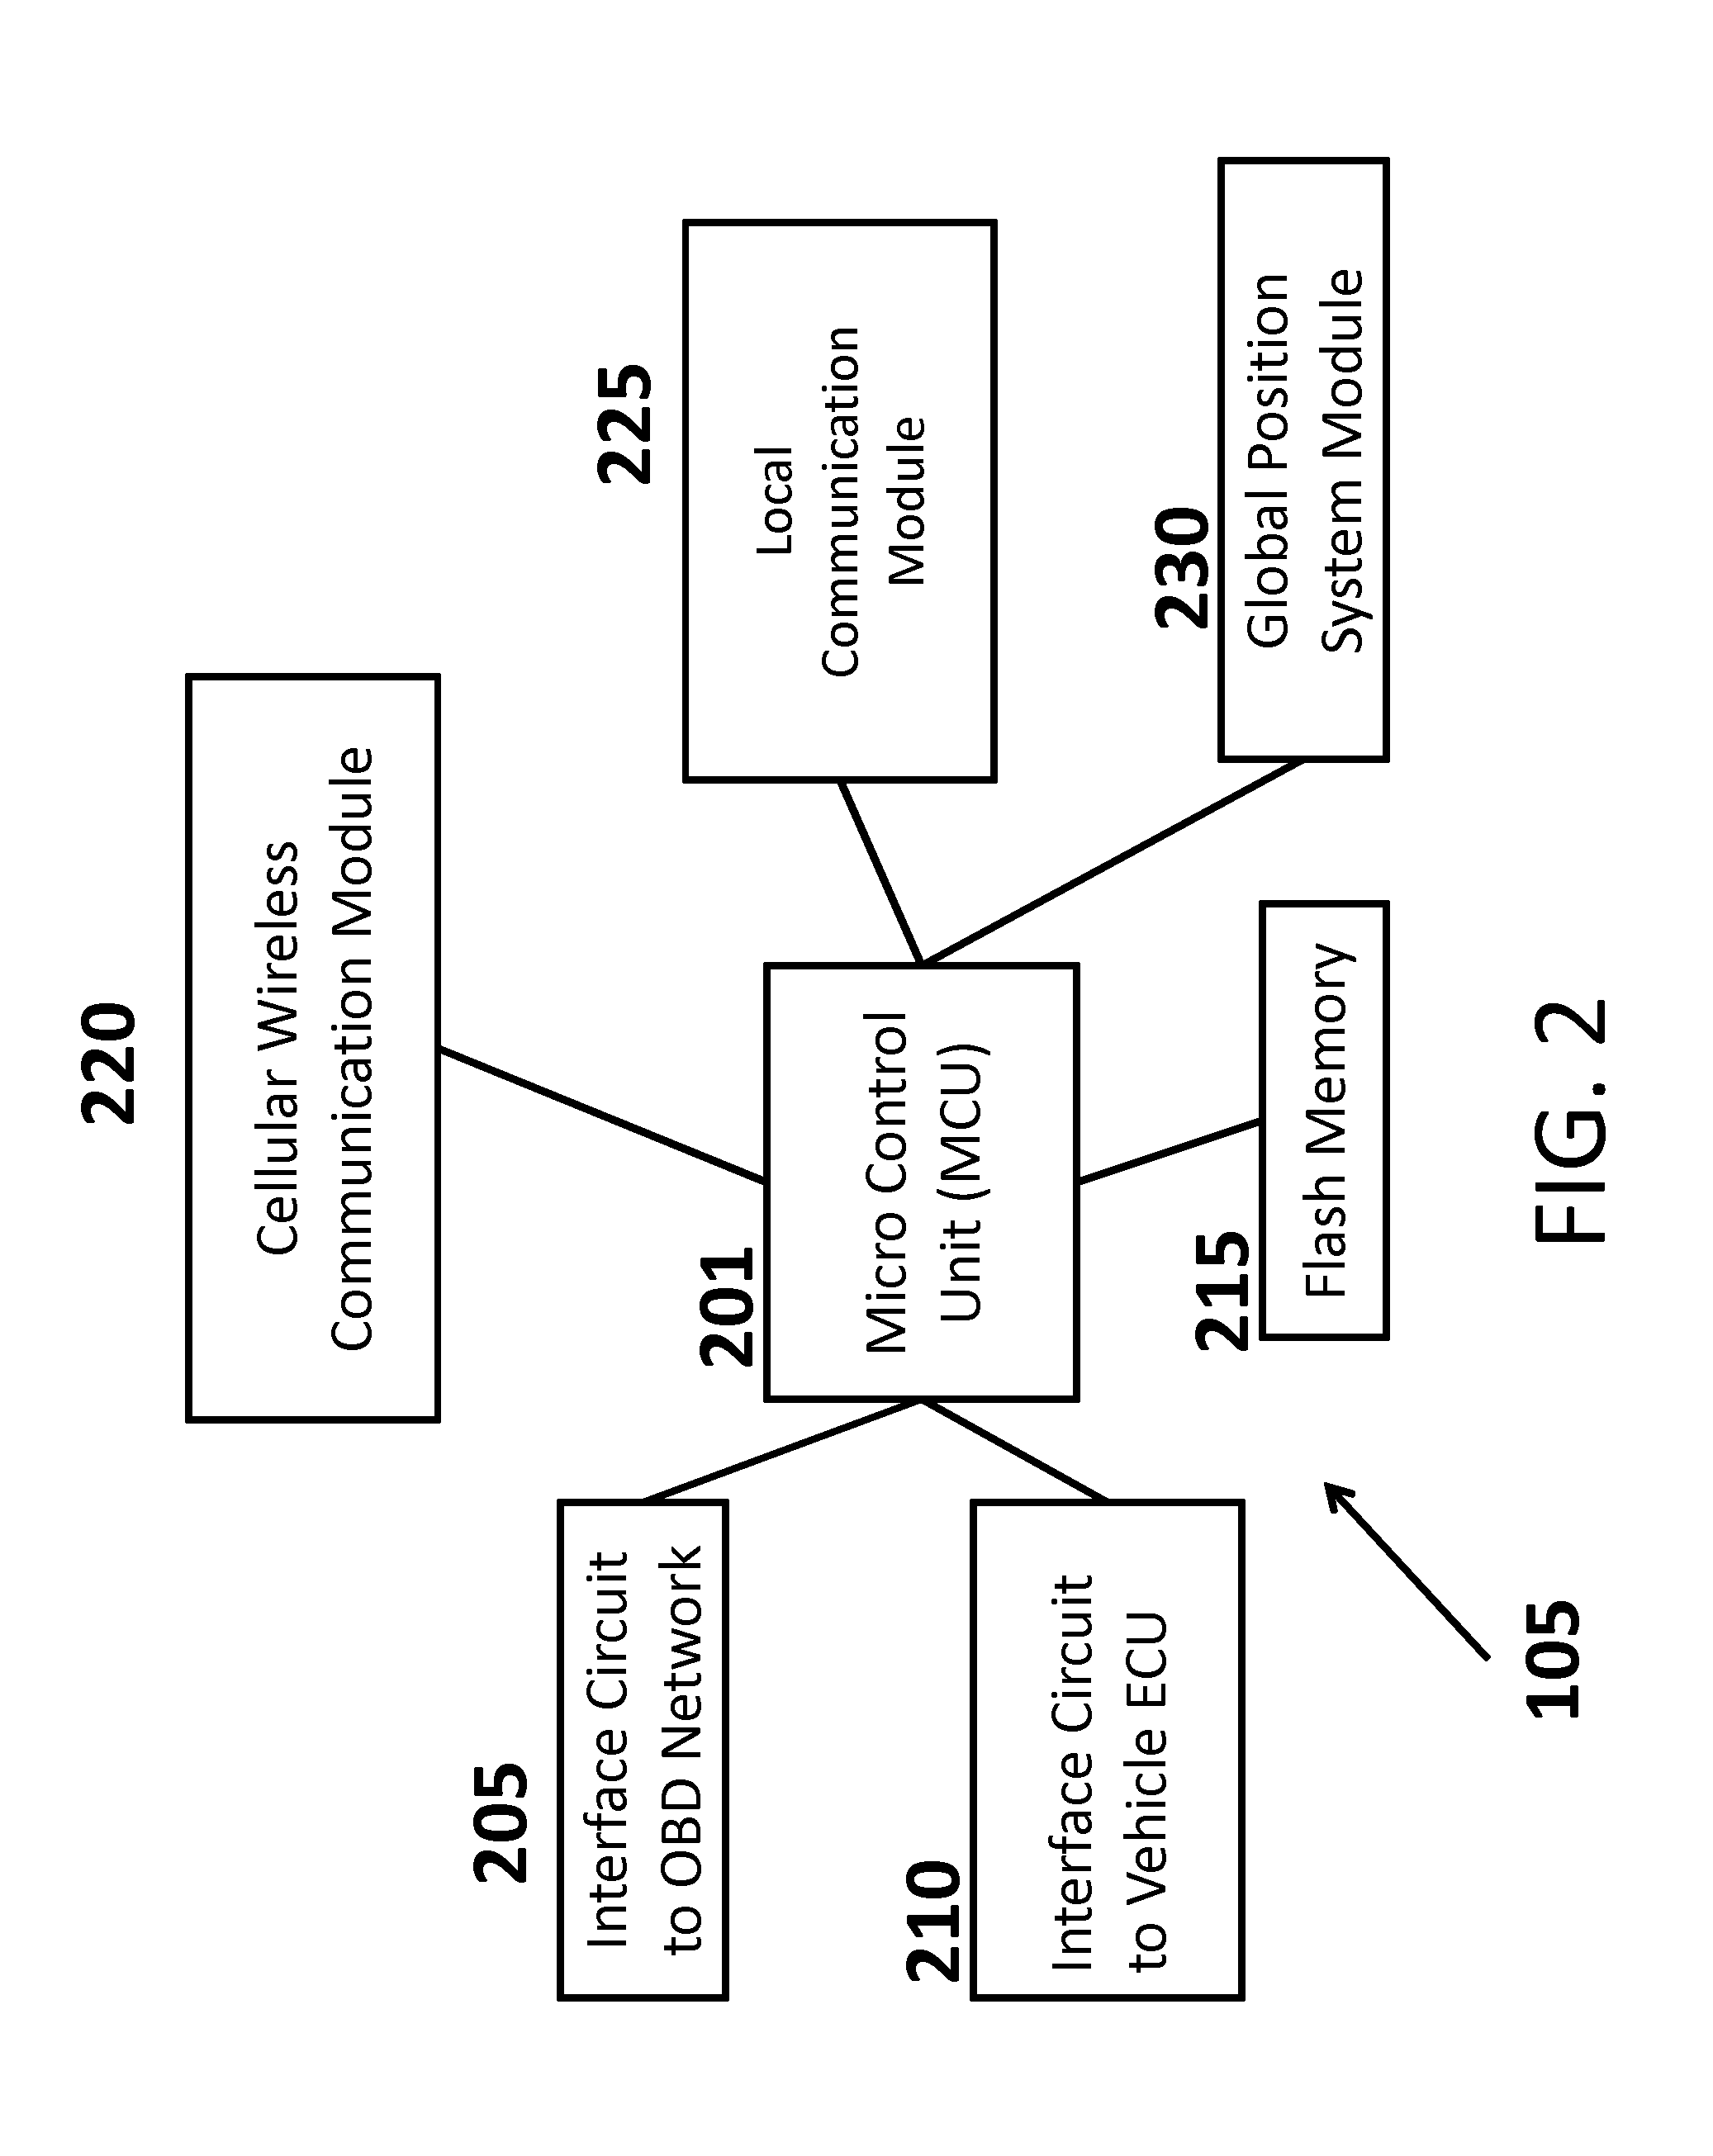 System, device and method of remote vehicle diagnostics based service for vehicle owners